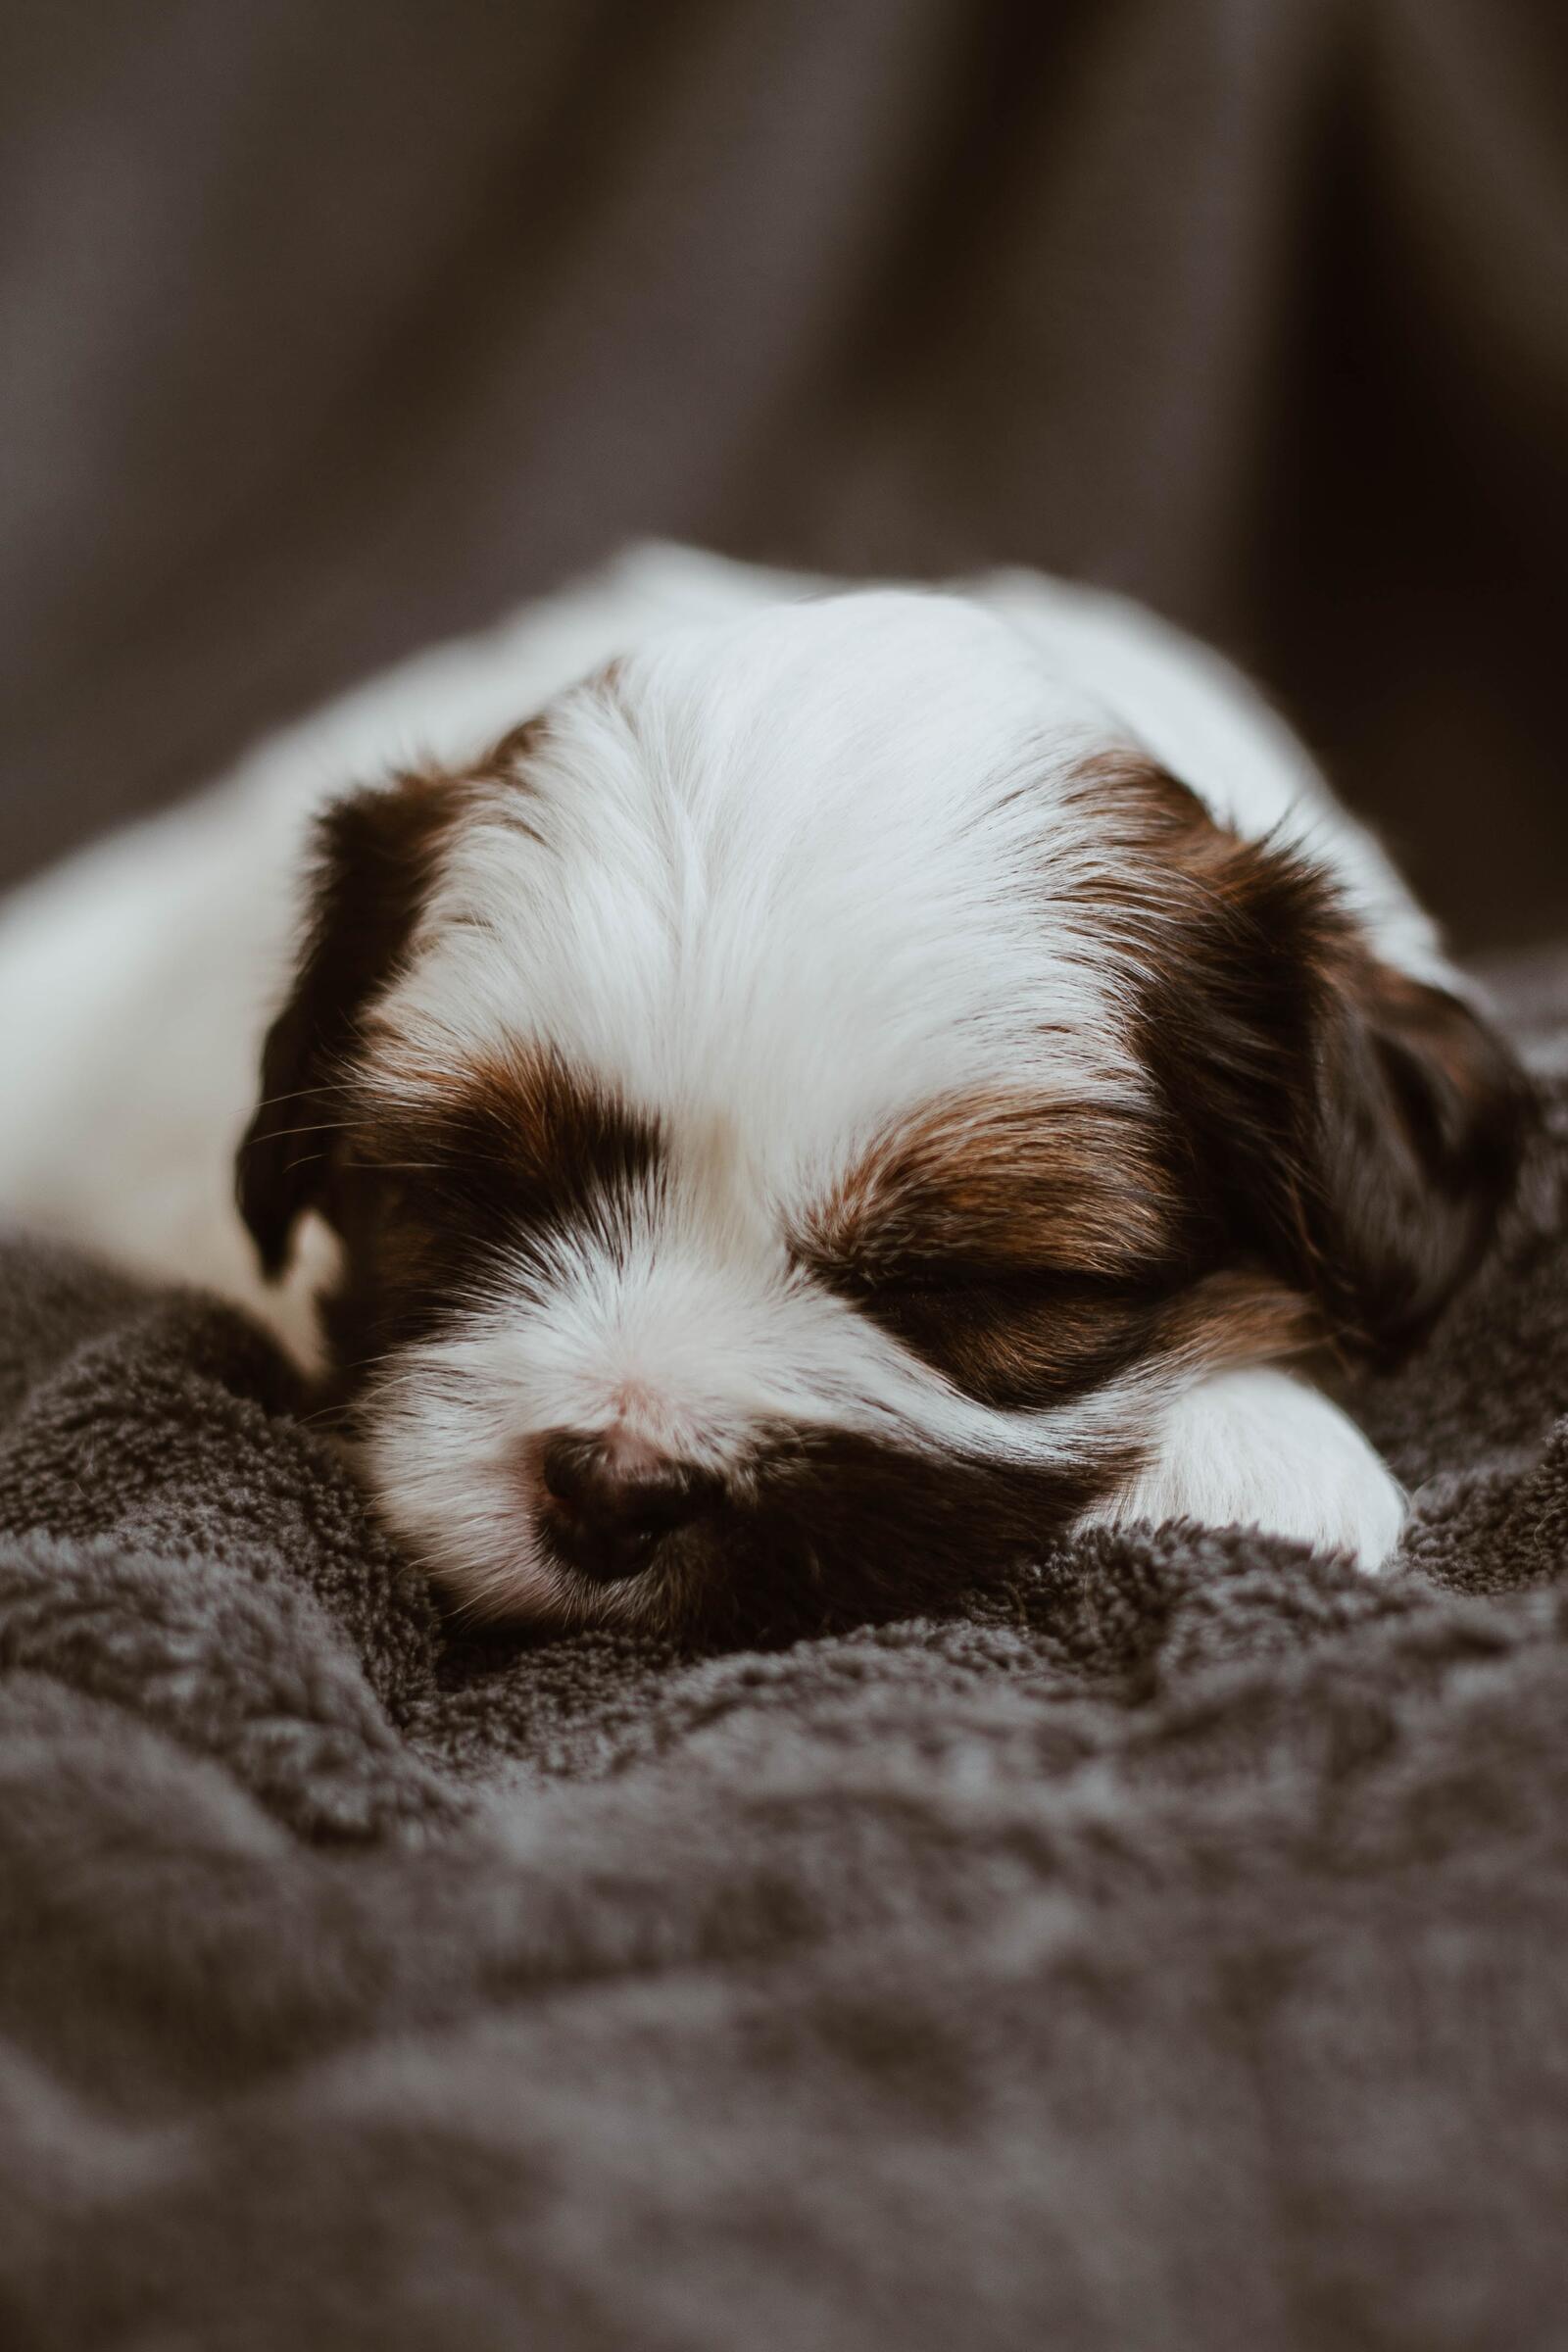 Free photo Wallpaper with a cute sleeping puppy